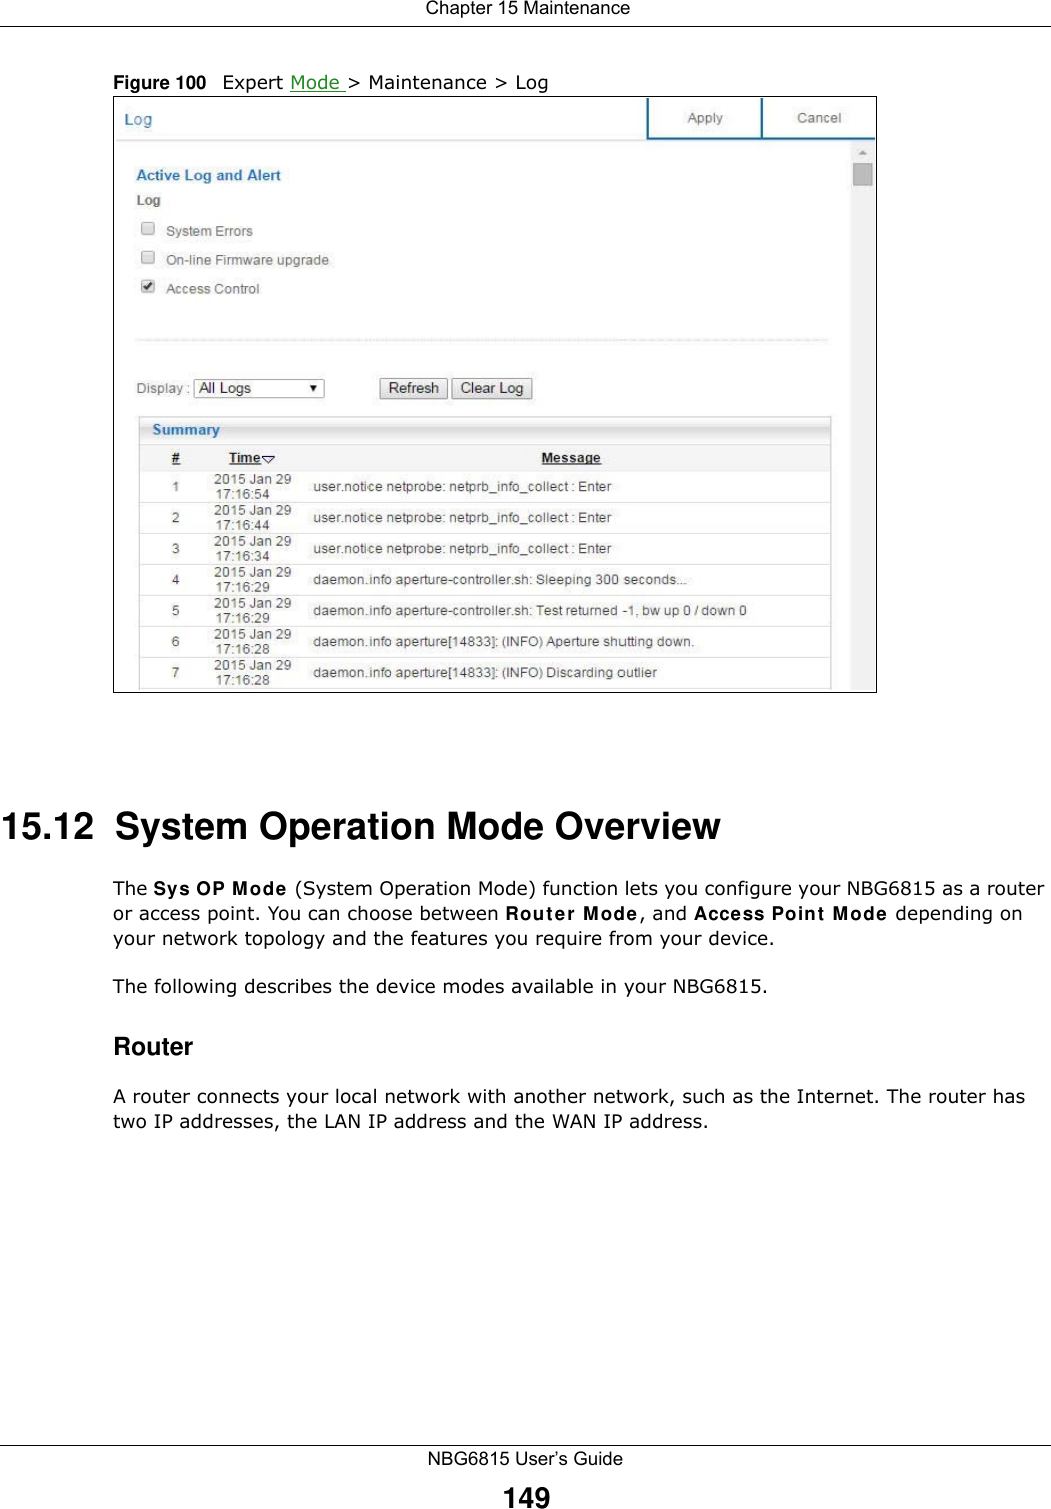  Chapter 15 MaintenanceNBG6815 User’s Guide149Figure 100   Expert Mode &gt; Maintenance &gt; Log 15.12  System Operation Mode OverviewThe Sys OP Mode (System Operation Mode) function lets you configure your NBG6815 as a router or access point. You can choose between Router Mode, and Access Point Mode depending on your network topology and the features you require from your device. The following describes the device modes available in your NBG6815.RouterA router connects your local network with another network, such as the Internet. The router has two IP addresses, the LAN IP address and the WAN IP address.